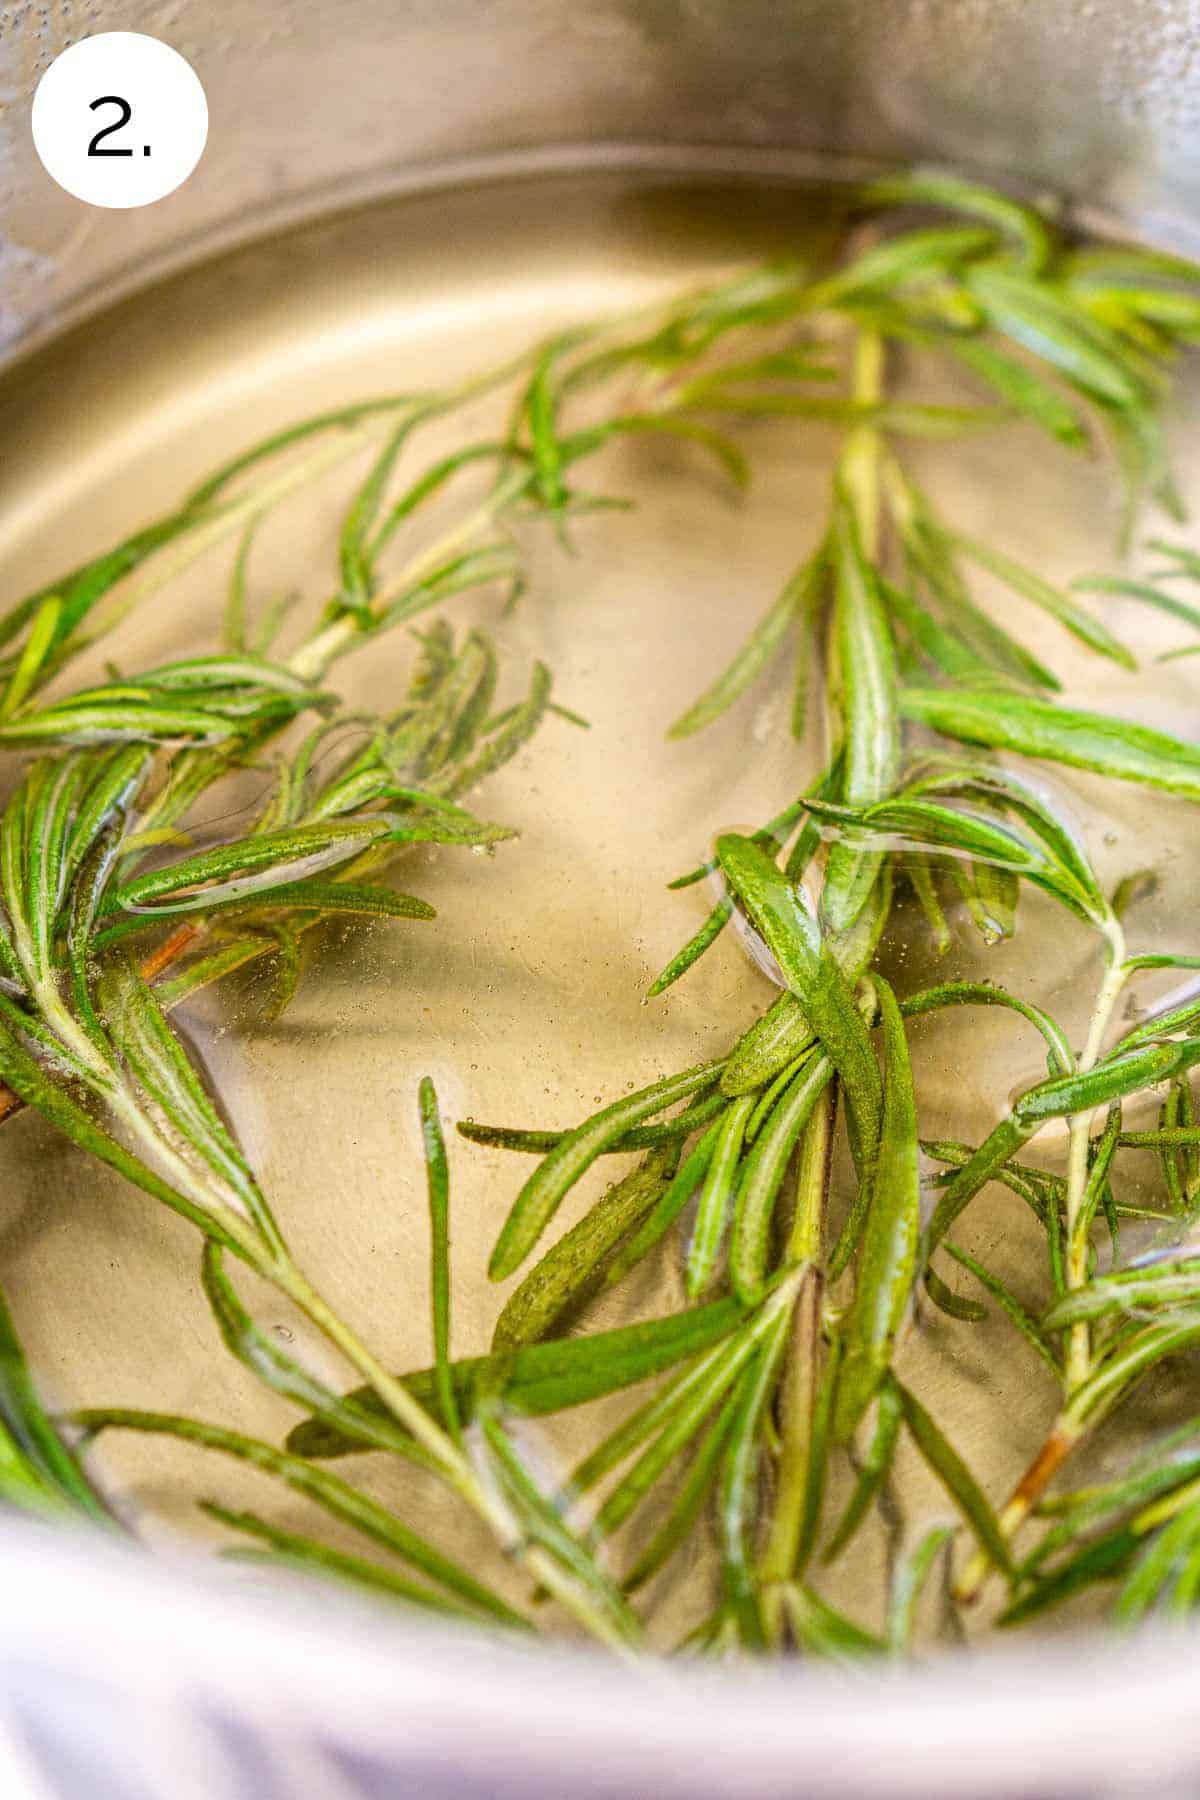 The rosemary sprigs steeping in the sugar syrup in a small stainless steel saucepan on the stove.